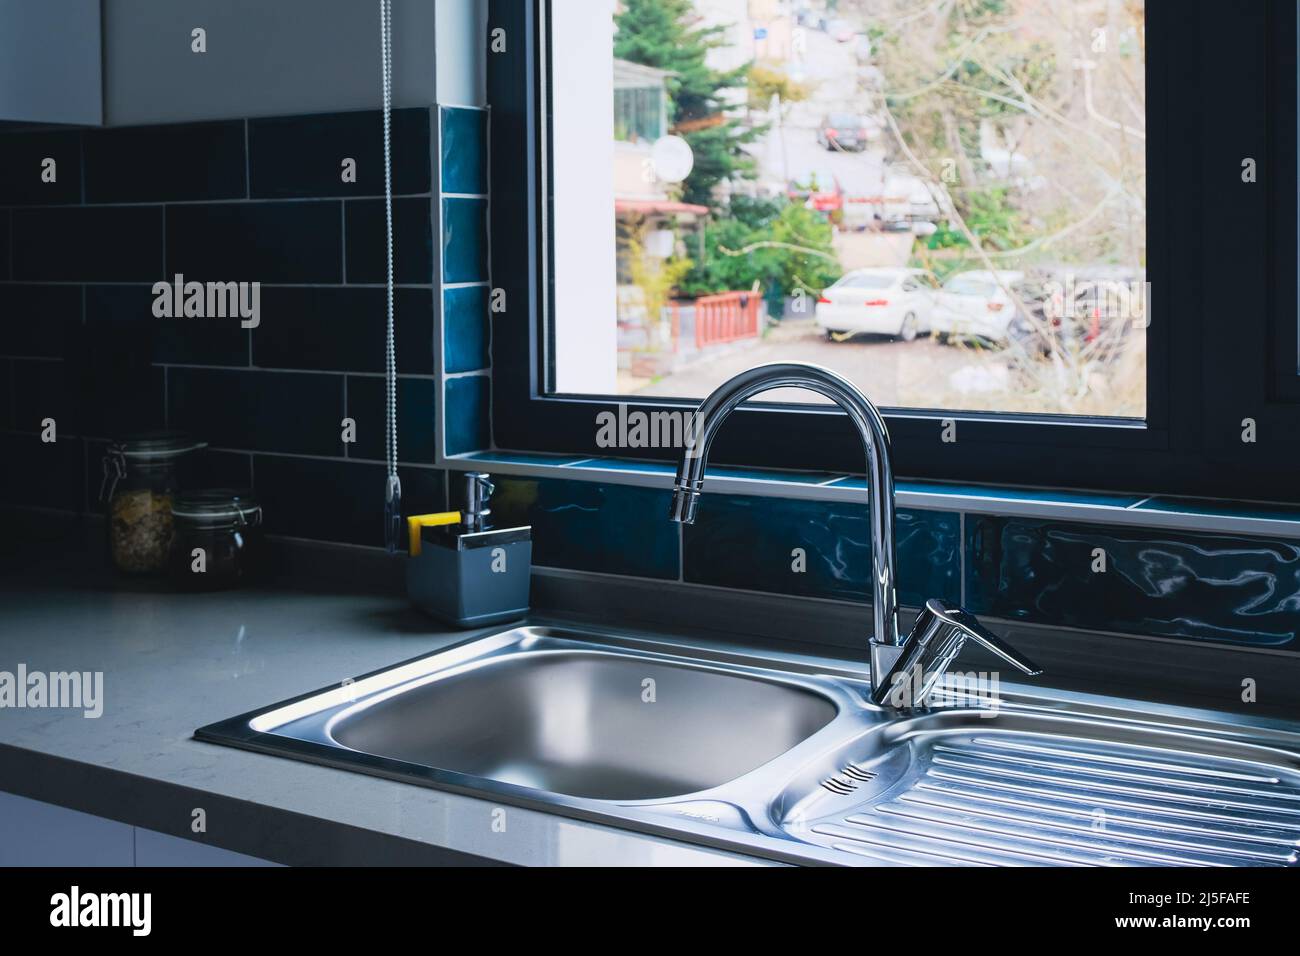 https://c8.alamy.com/comp/2J5FAFE/clean-kitchen-sink-in-modern-kitchen-with-a-window-view-cleaning-service-and-real-estate-2J5FAFE.jpg